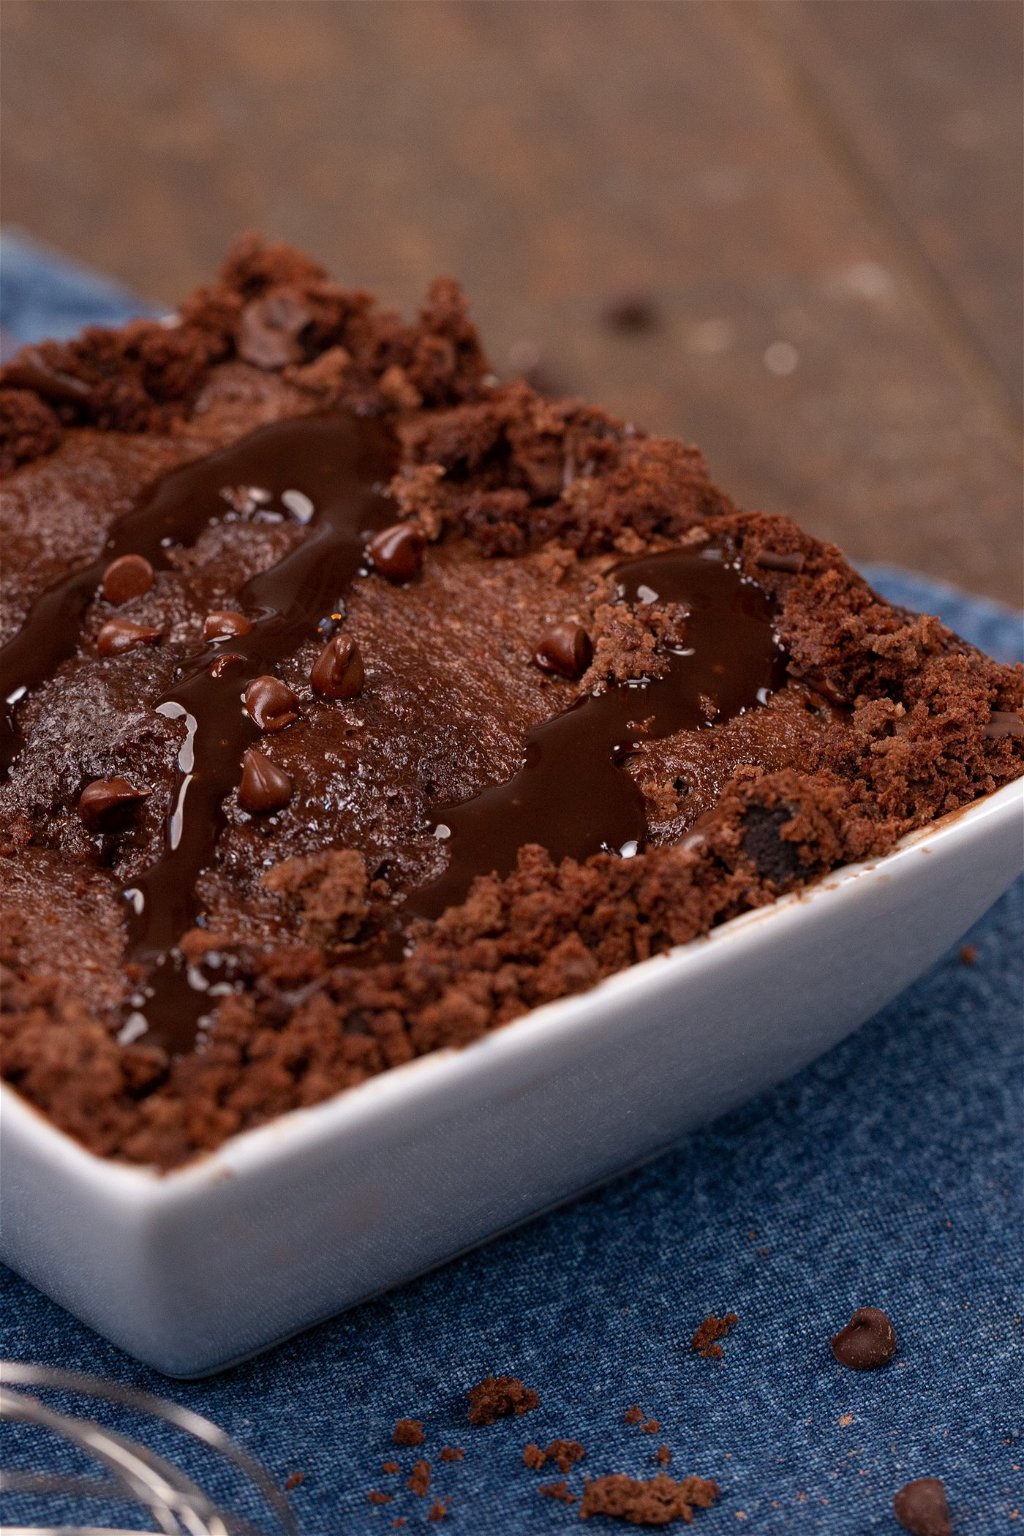 https://media.theproteinchef.co/wp-content/uploads/2022/03/The-Best-Microwave-Protein-Brownie-Recipe.jpg